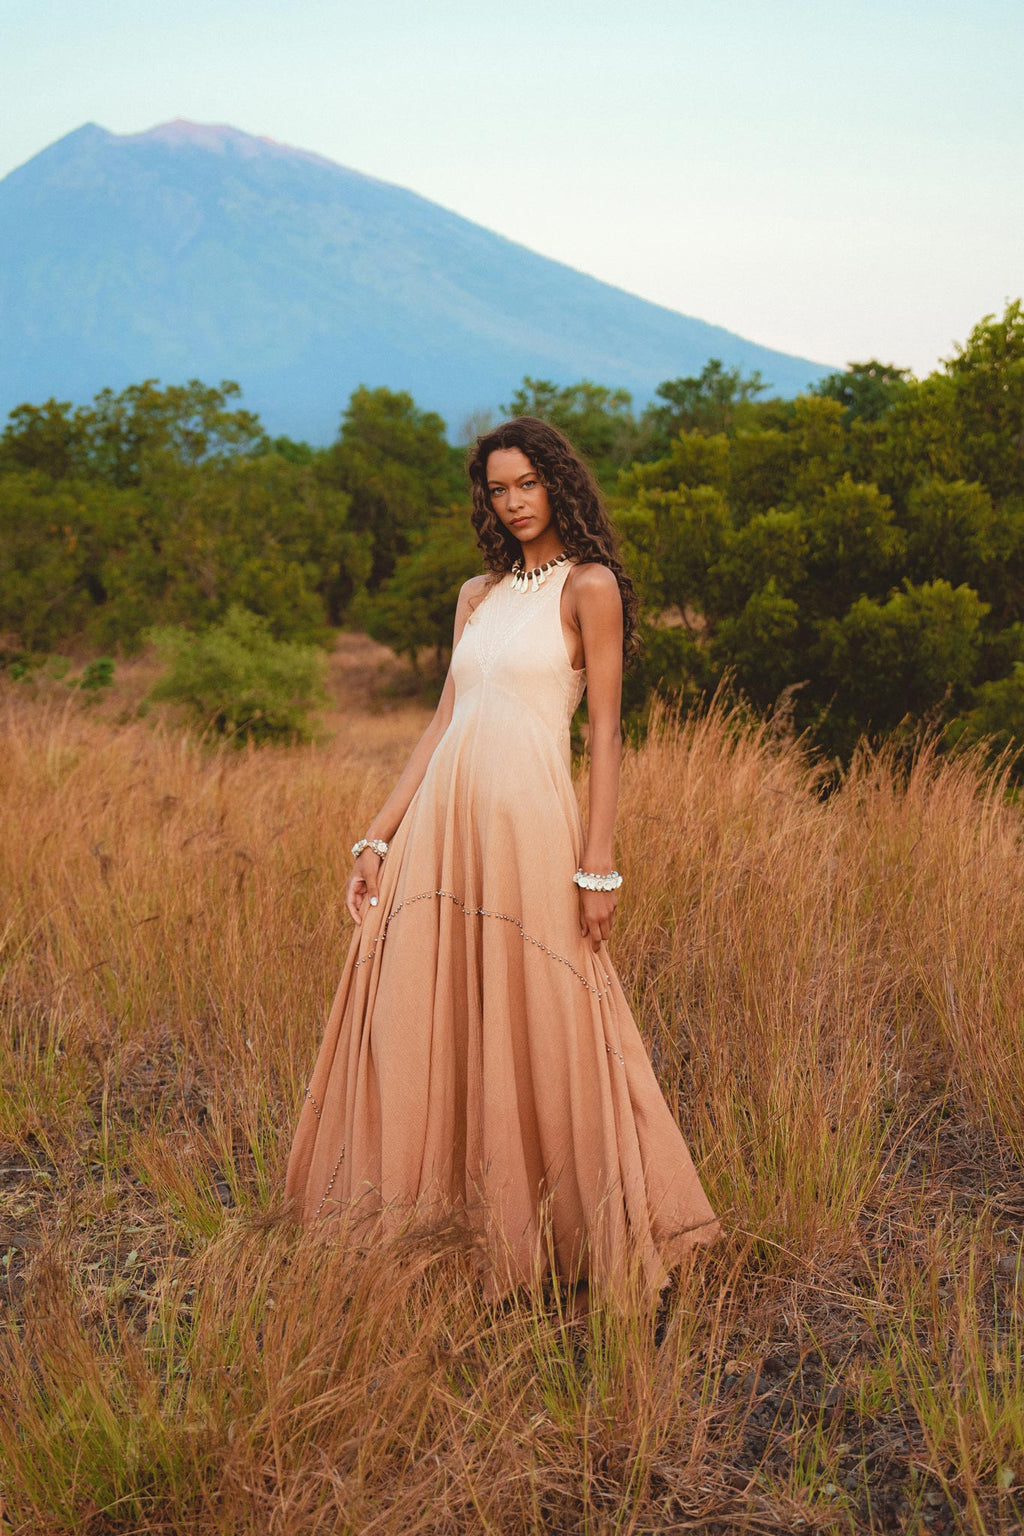 Show off your style with the modern and chic Ombré Pink Minimalist Dress from aya sacred wear.